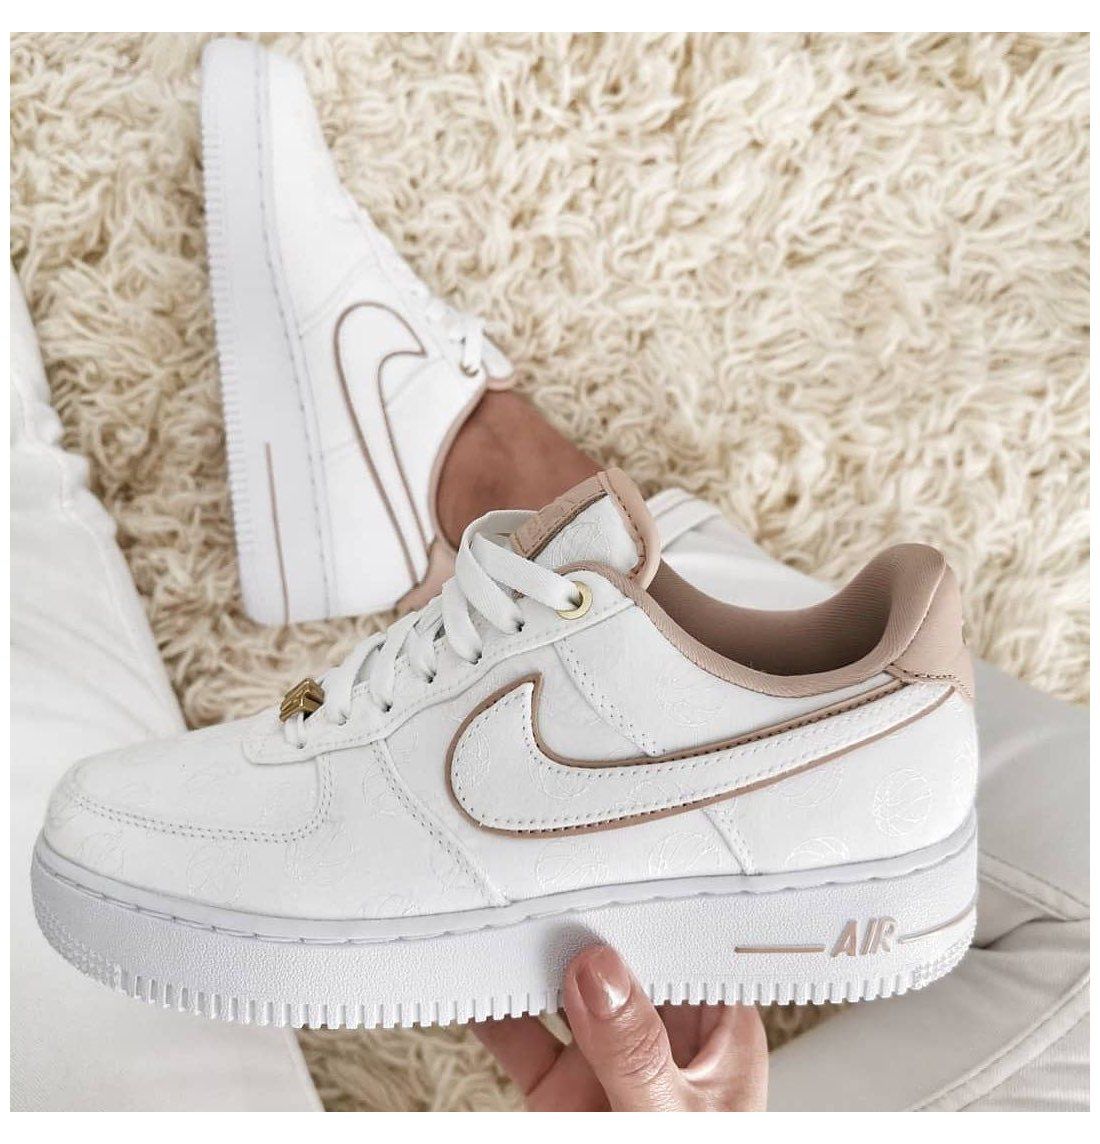 air force one nike outfit